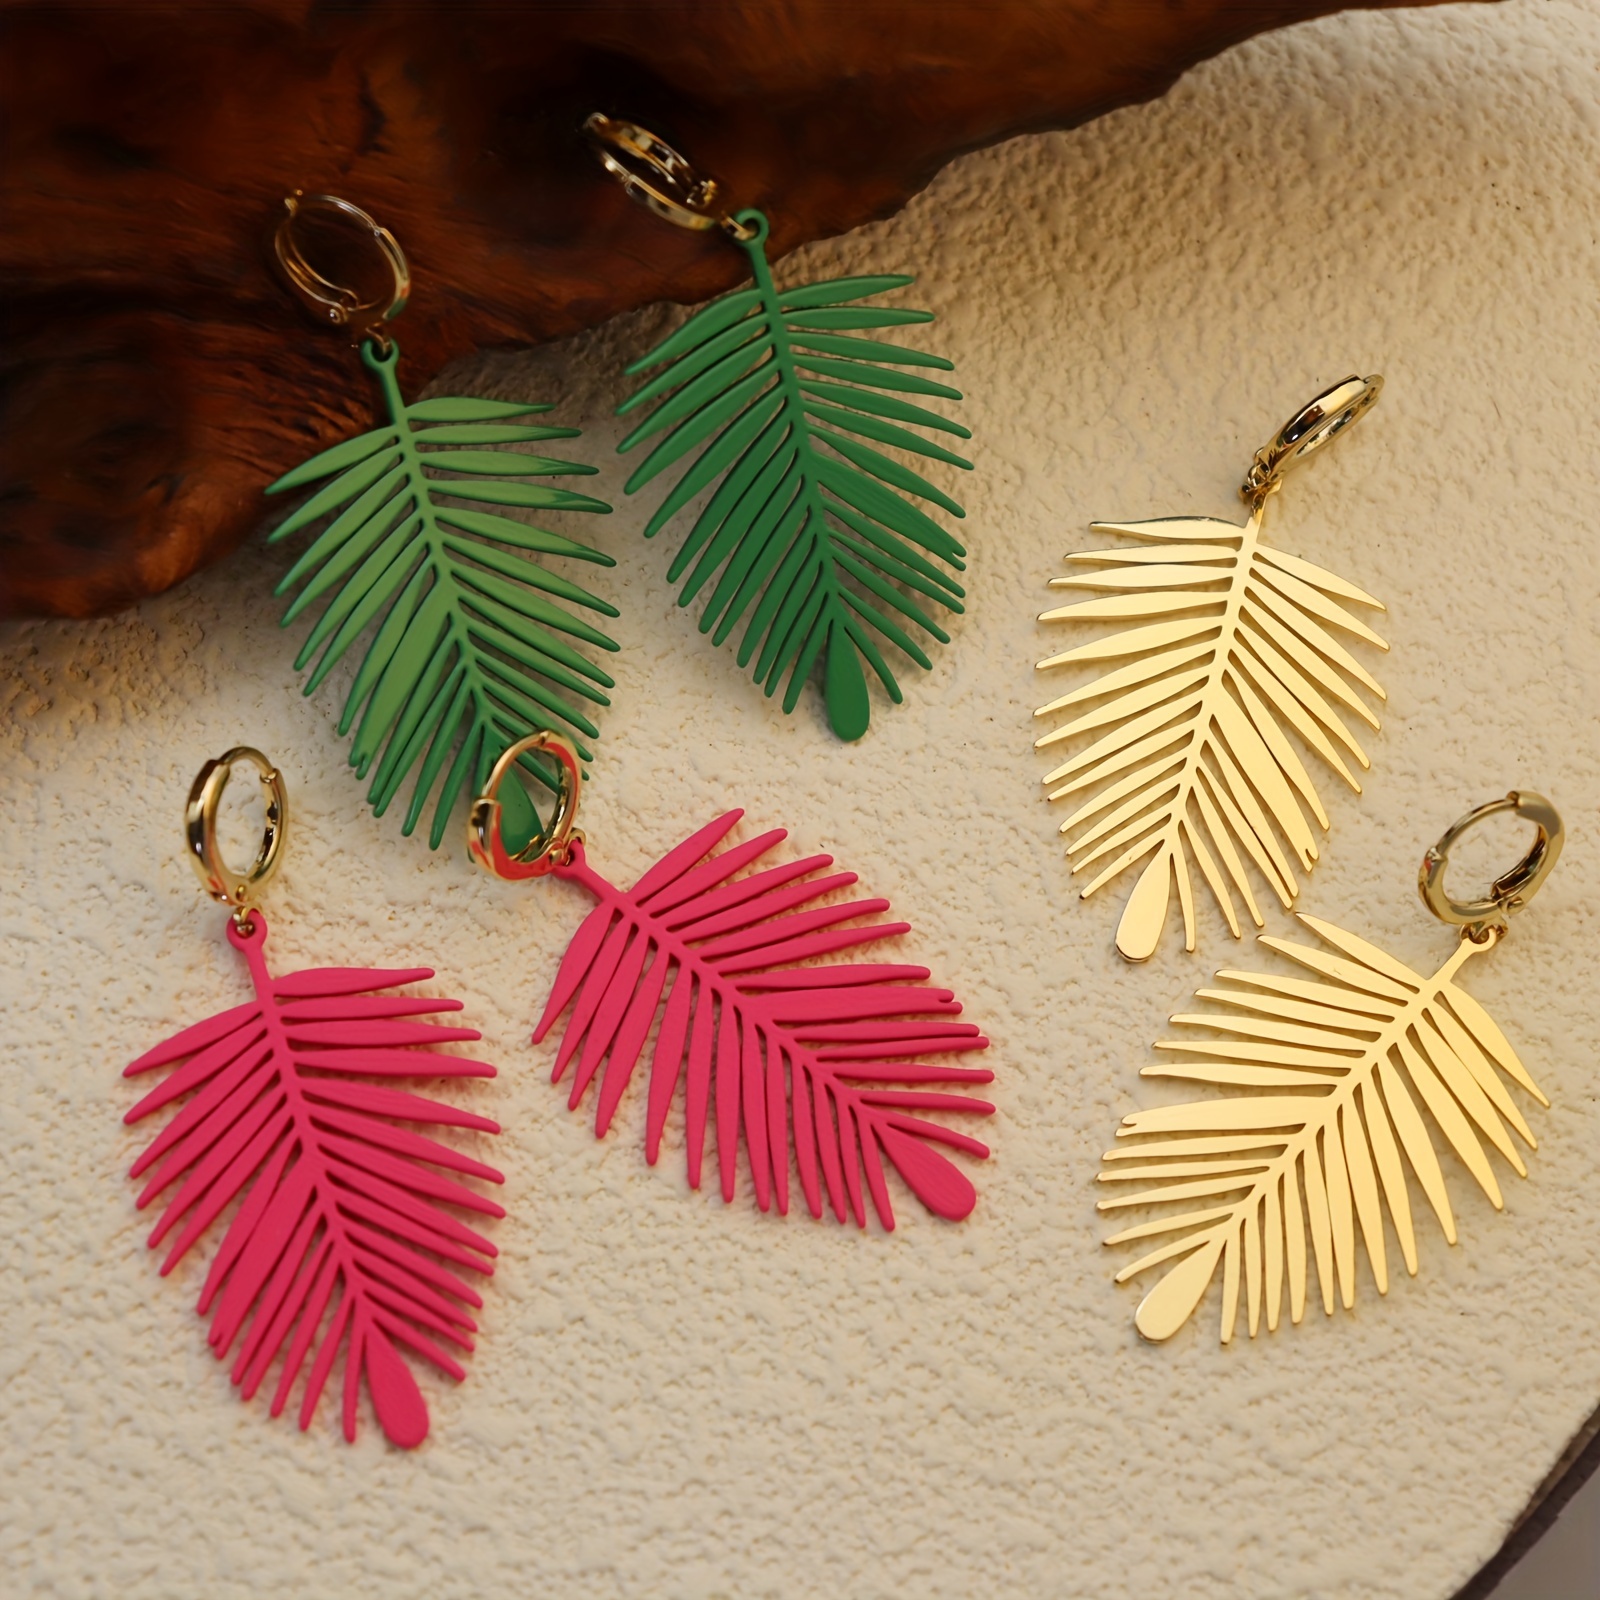 

Vintage Elegant Tropical Leaf Dangle Earrings, 1 Pair Colorful Metal Hollow-out Creative Design, Summer Vacation All-match Statement Jewelry